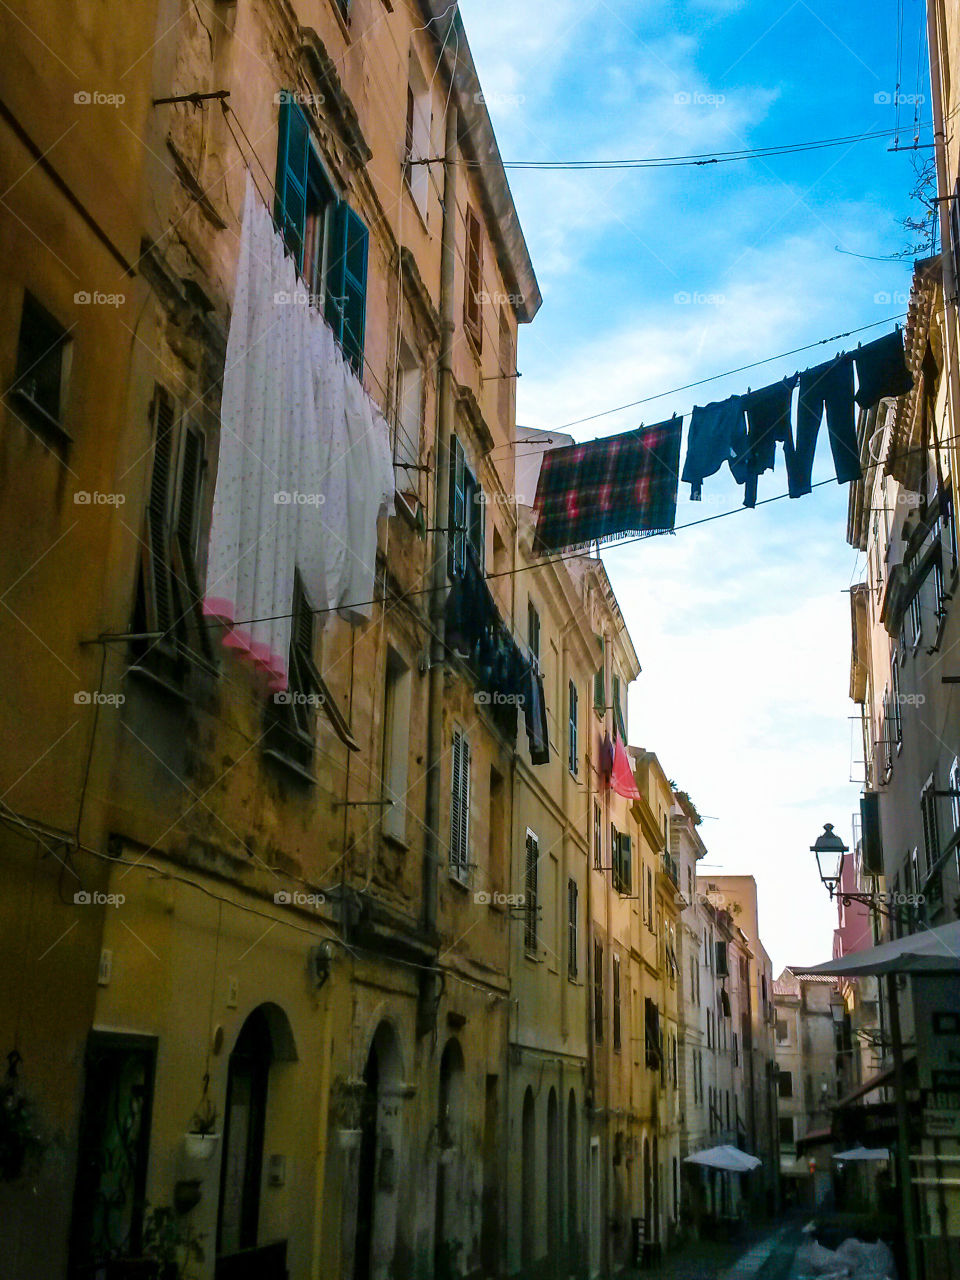 drying clothes in the narrow street of old center city. Alghero Sardinia